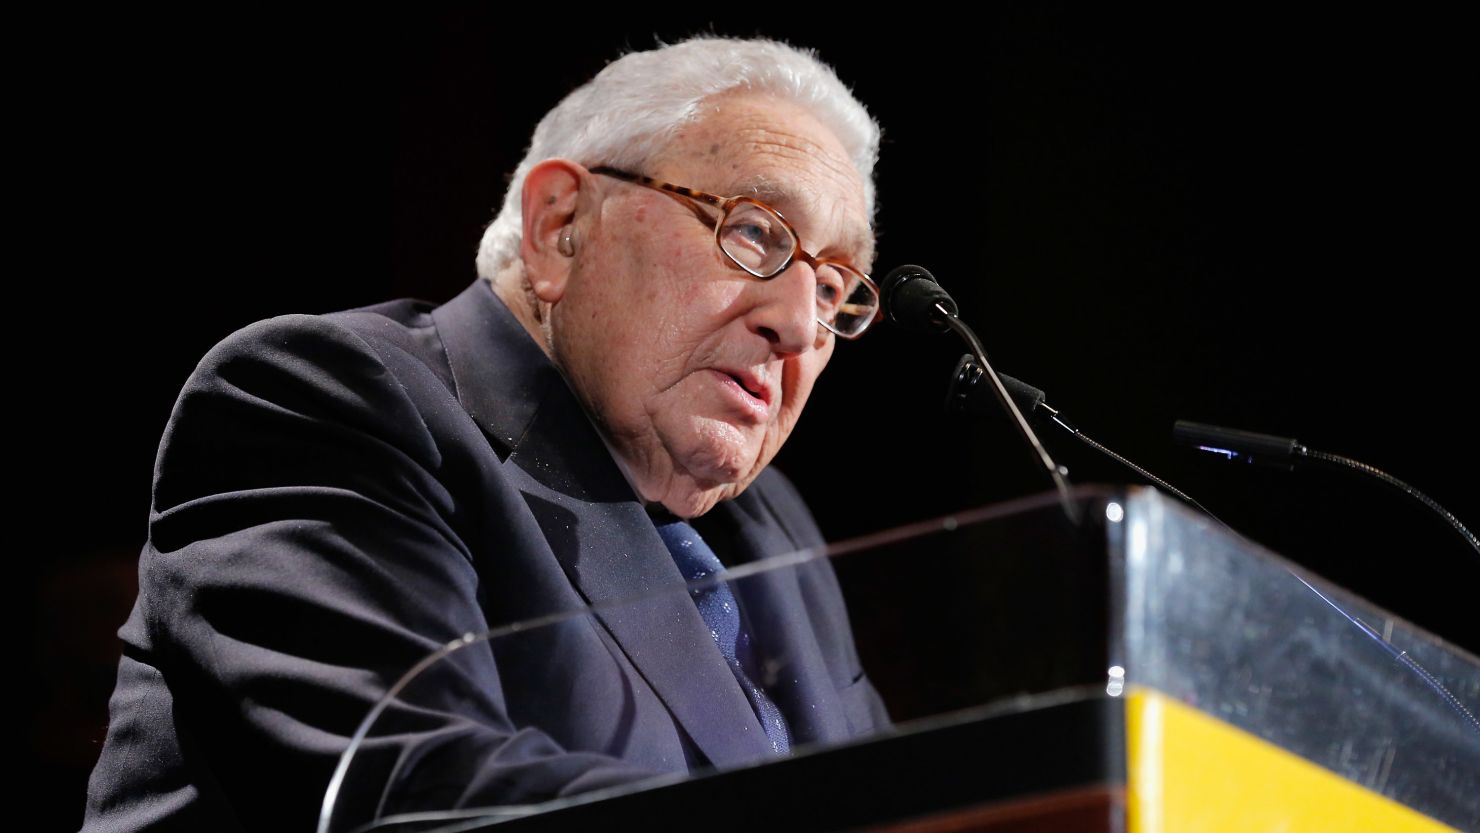 Nobel Peace Prize winner Henry Kissinger's On China is on a list of books recommended by EPL players.